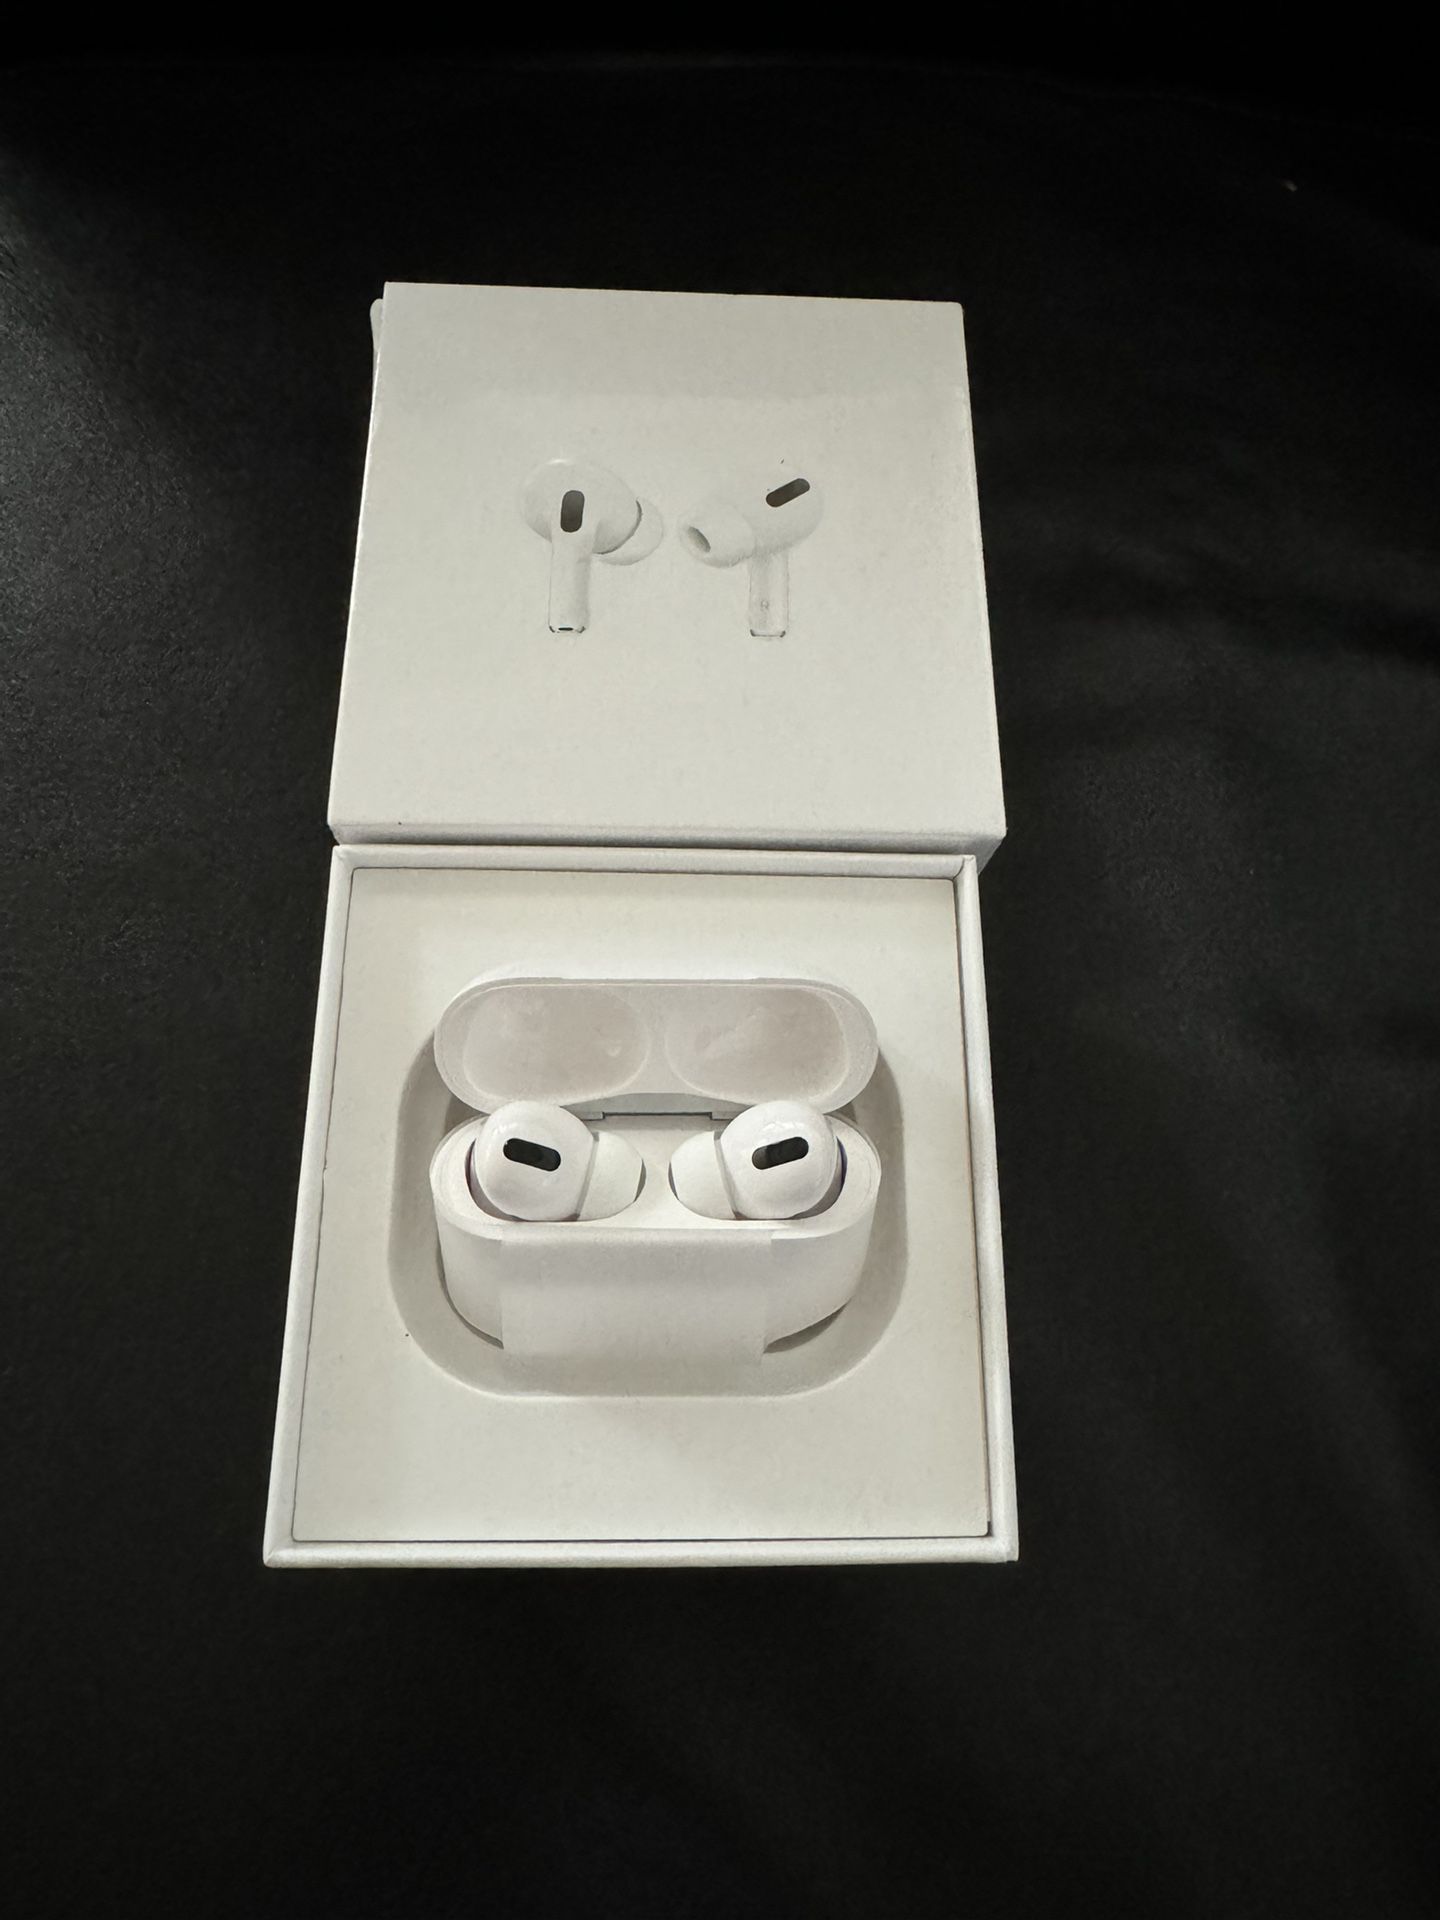 AirPods Pro - Brand New 